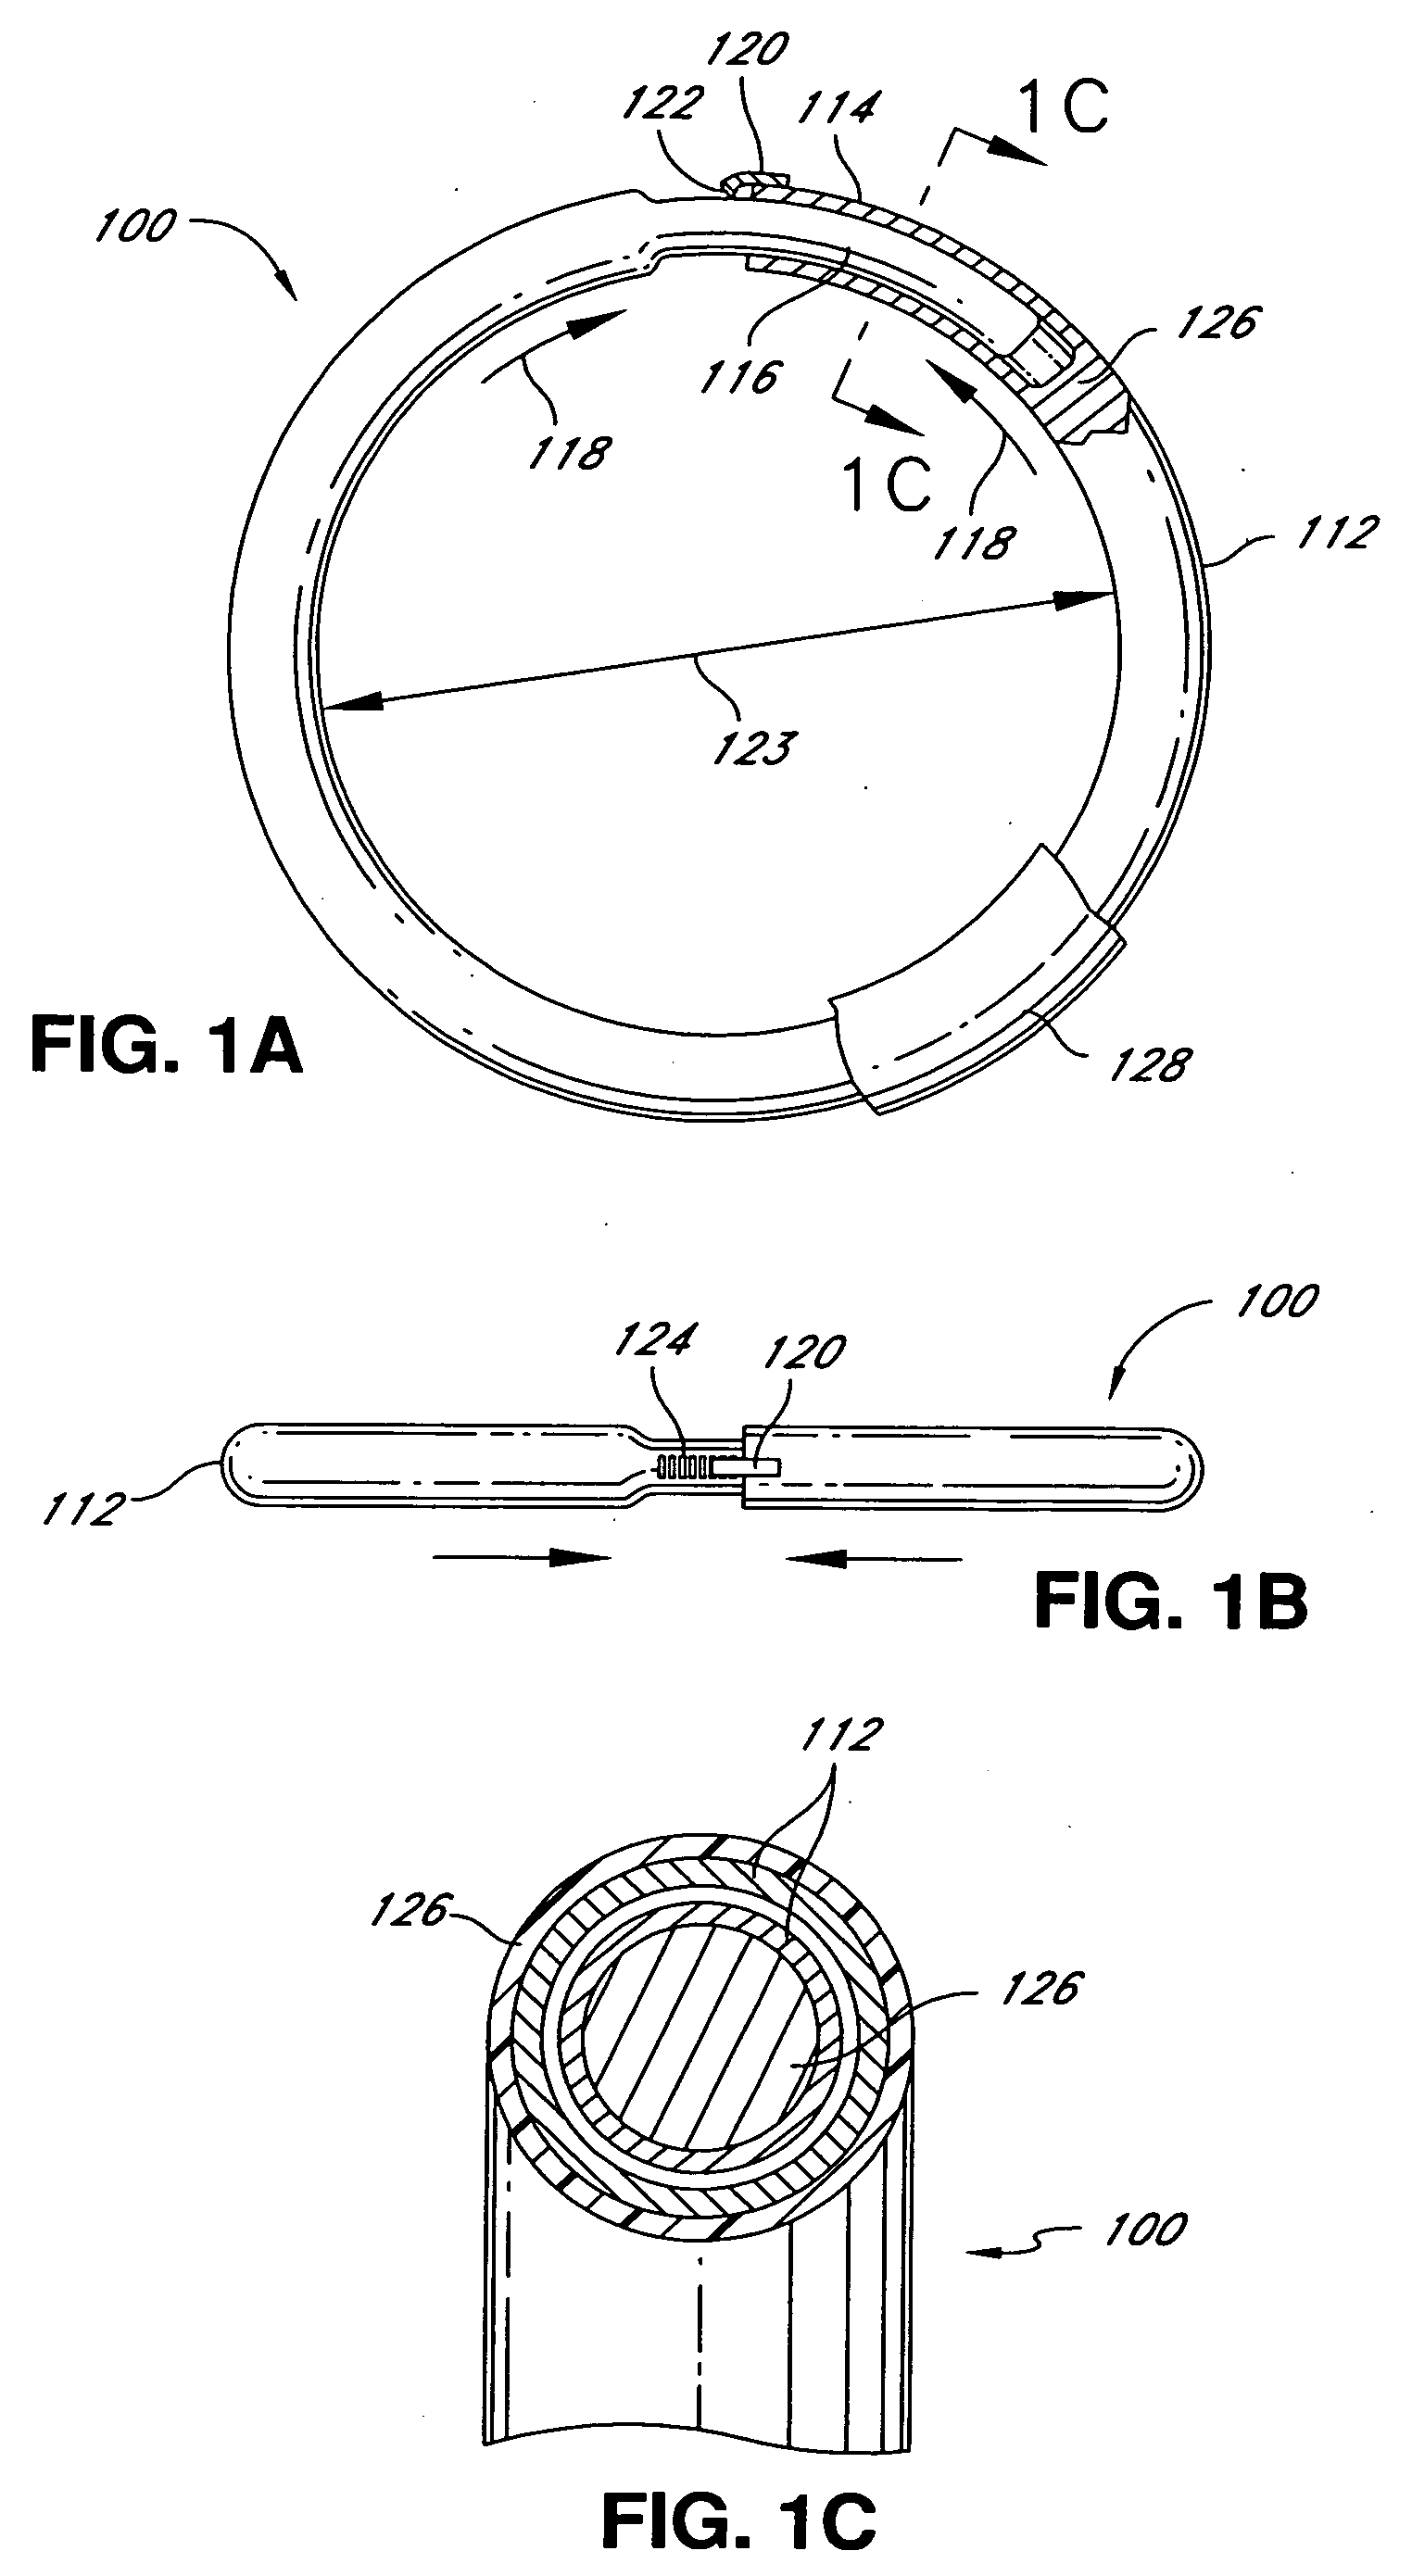 Magnetic engagement of catheter to implantable device